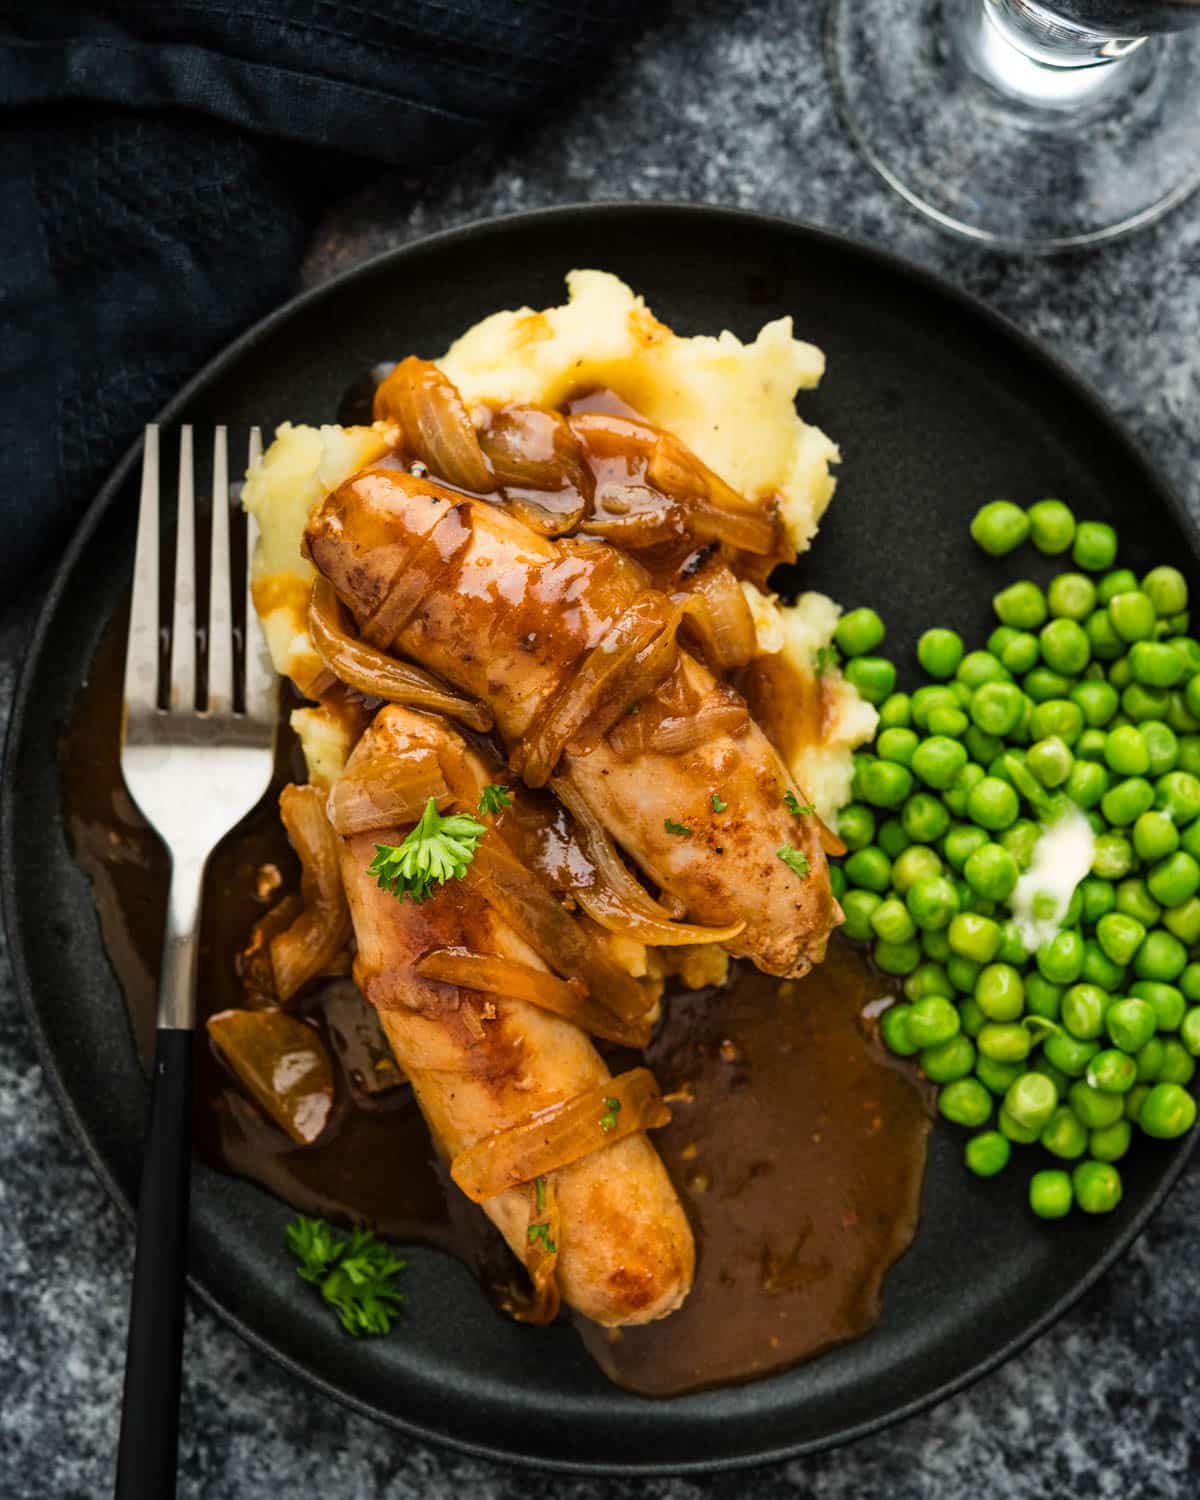 Serving Irish Sausages with onion gravy over mashed potatoes.